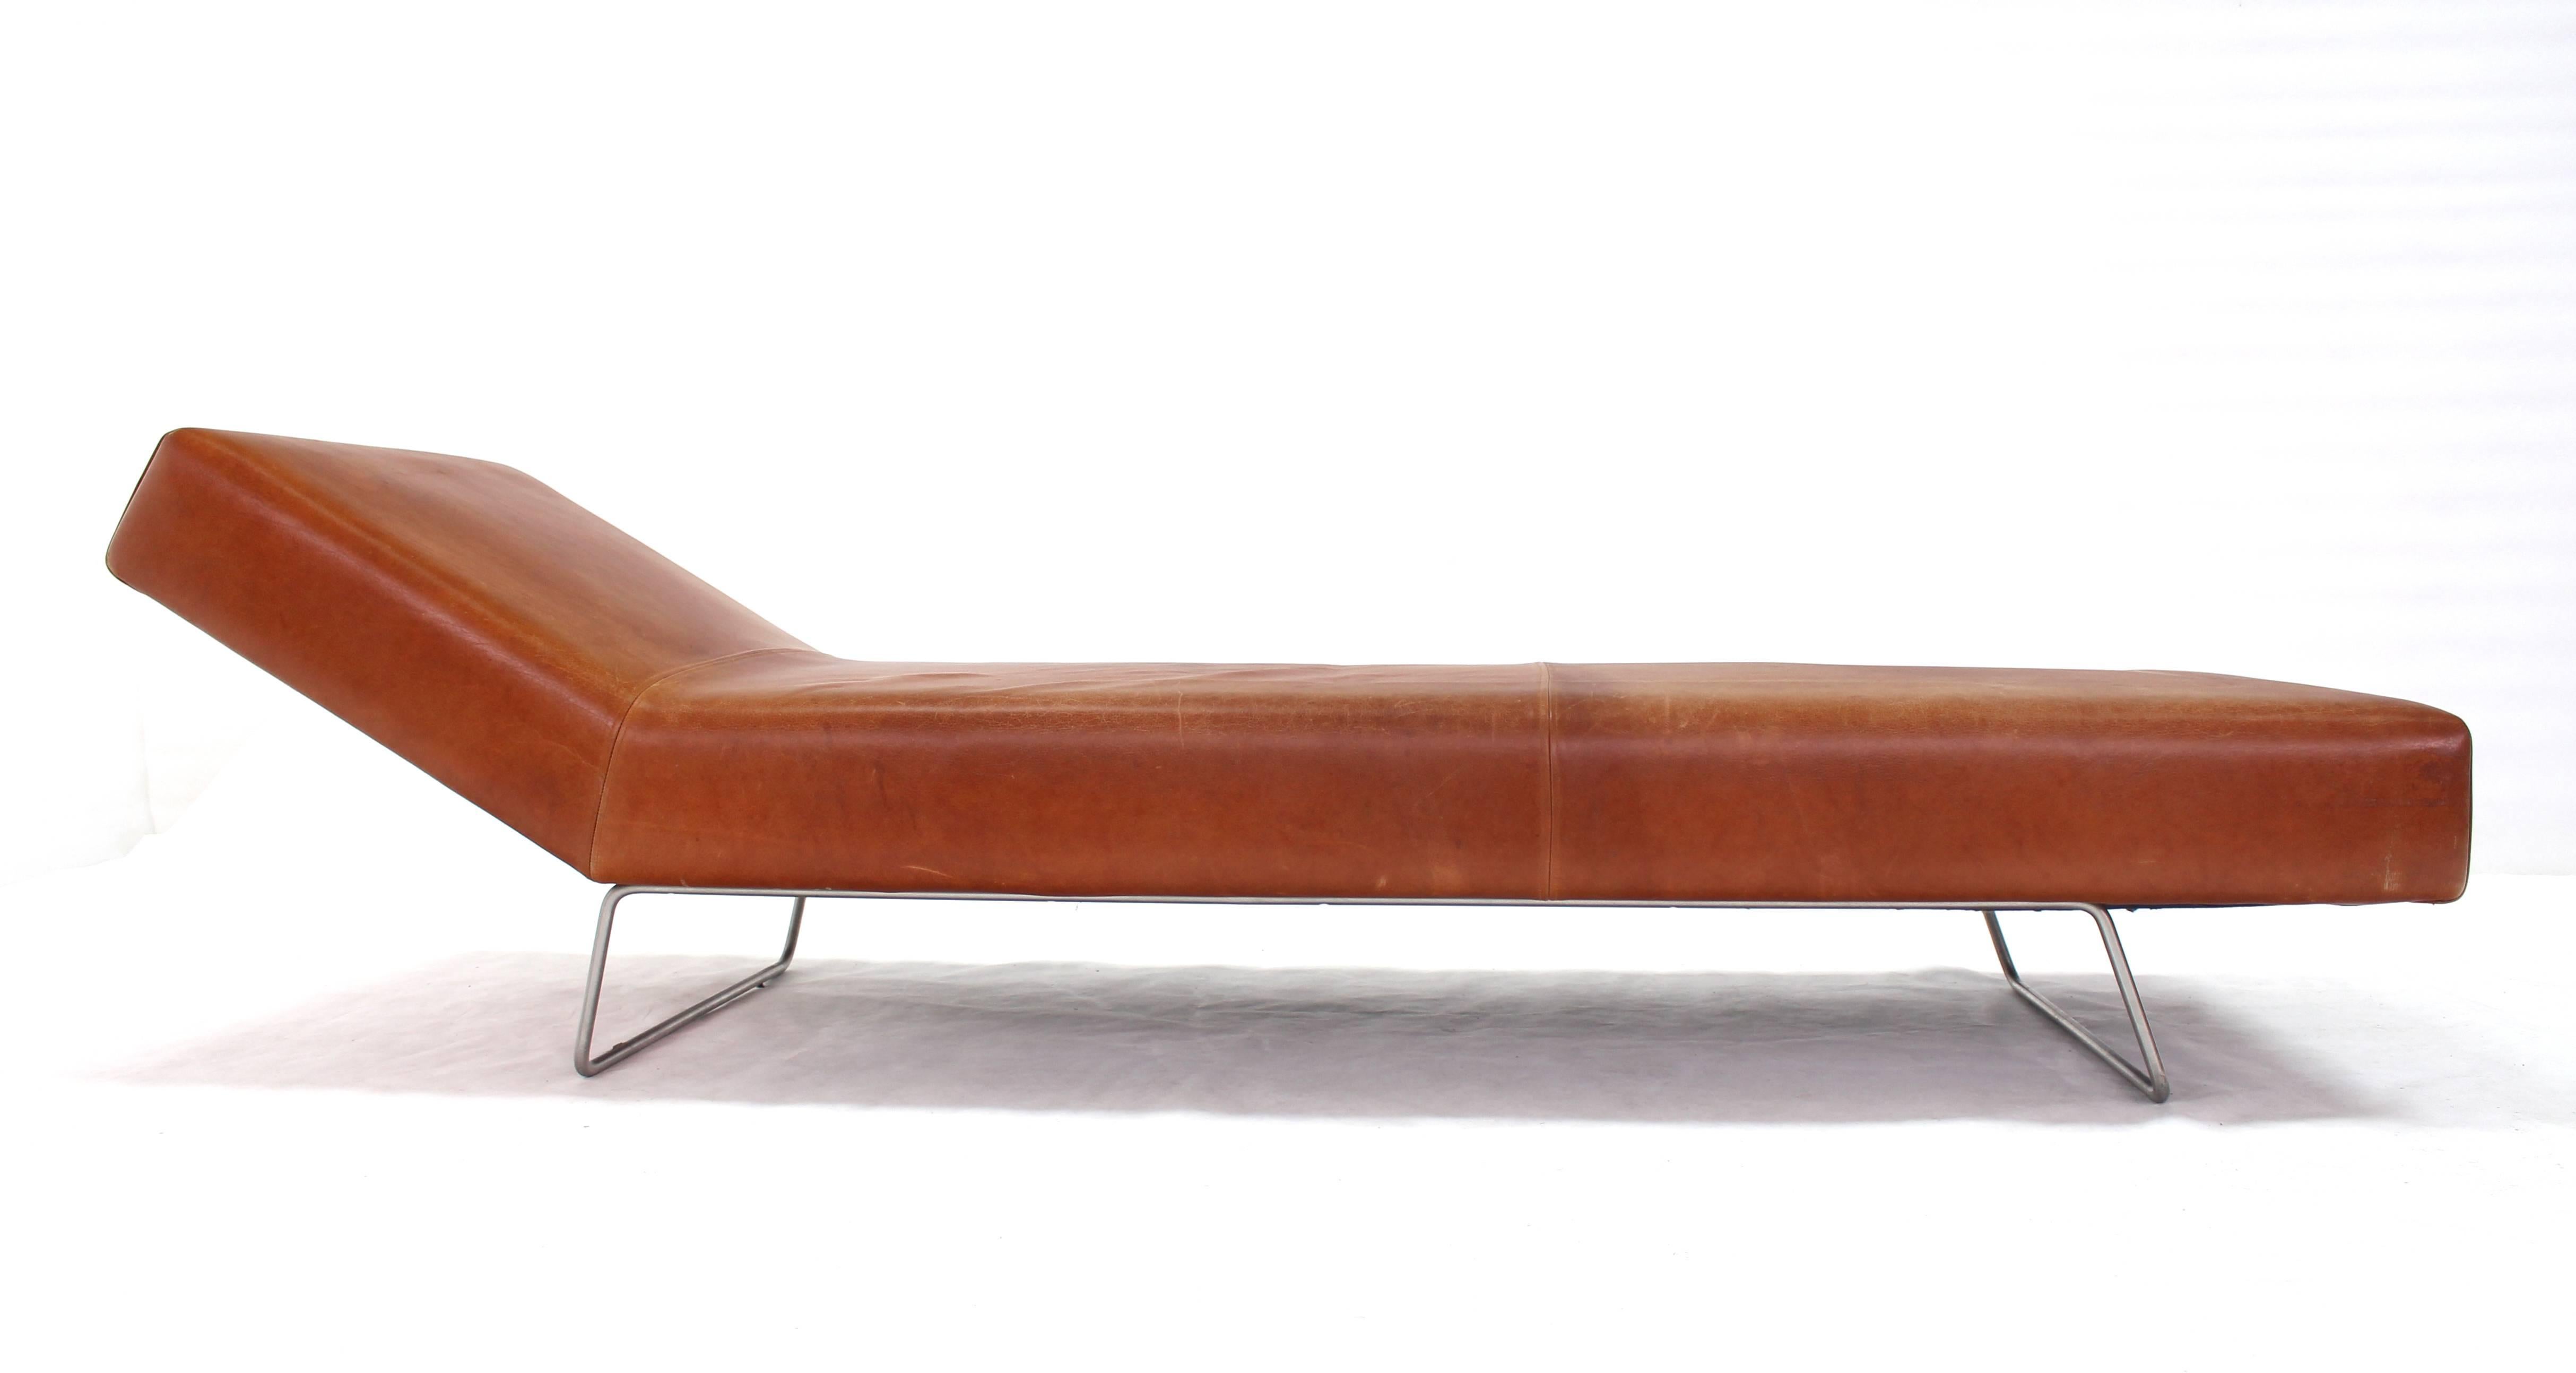 Mid-Century Modern leather chaise longue daybed cot.